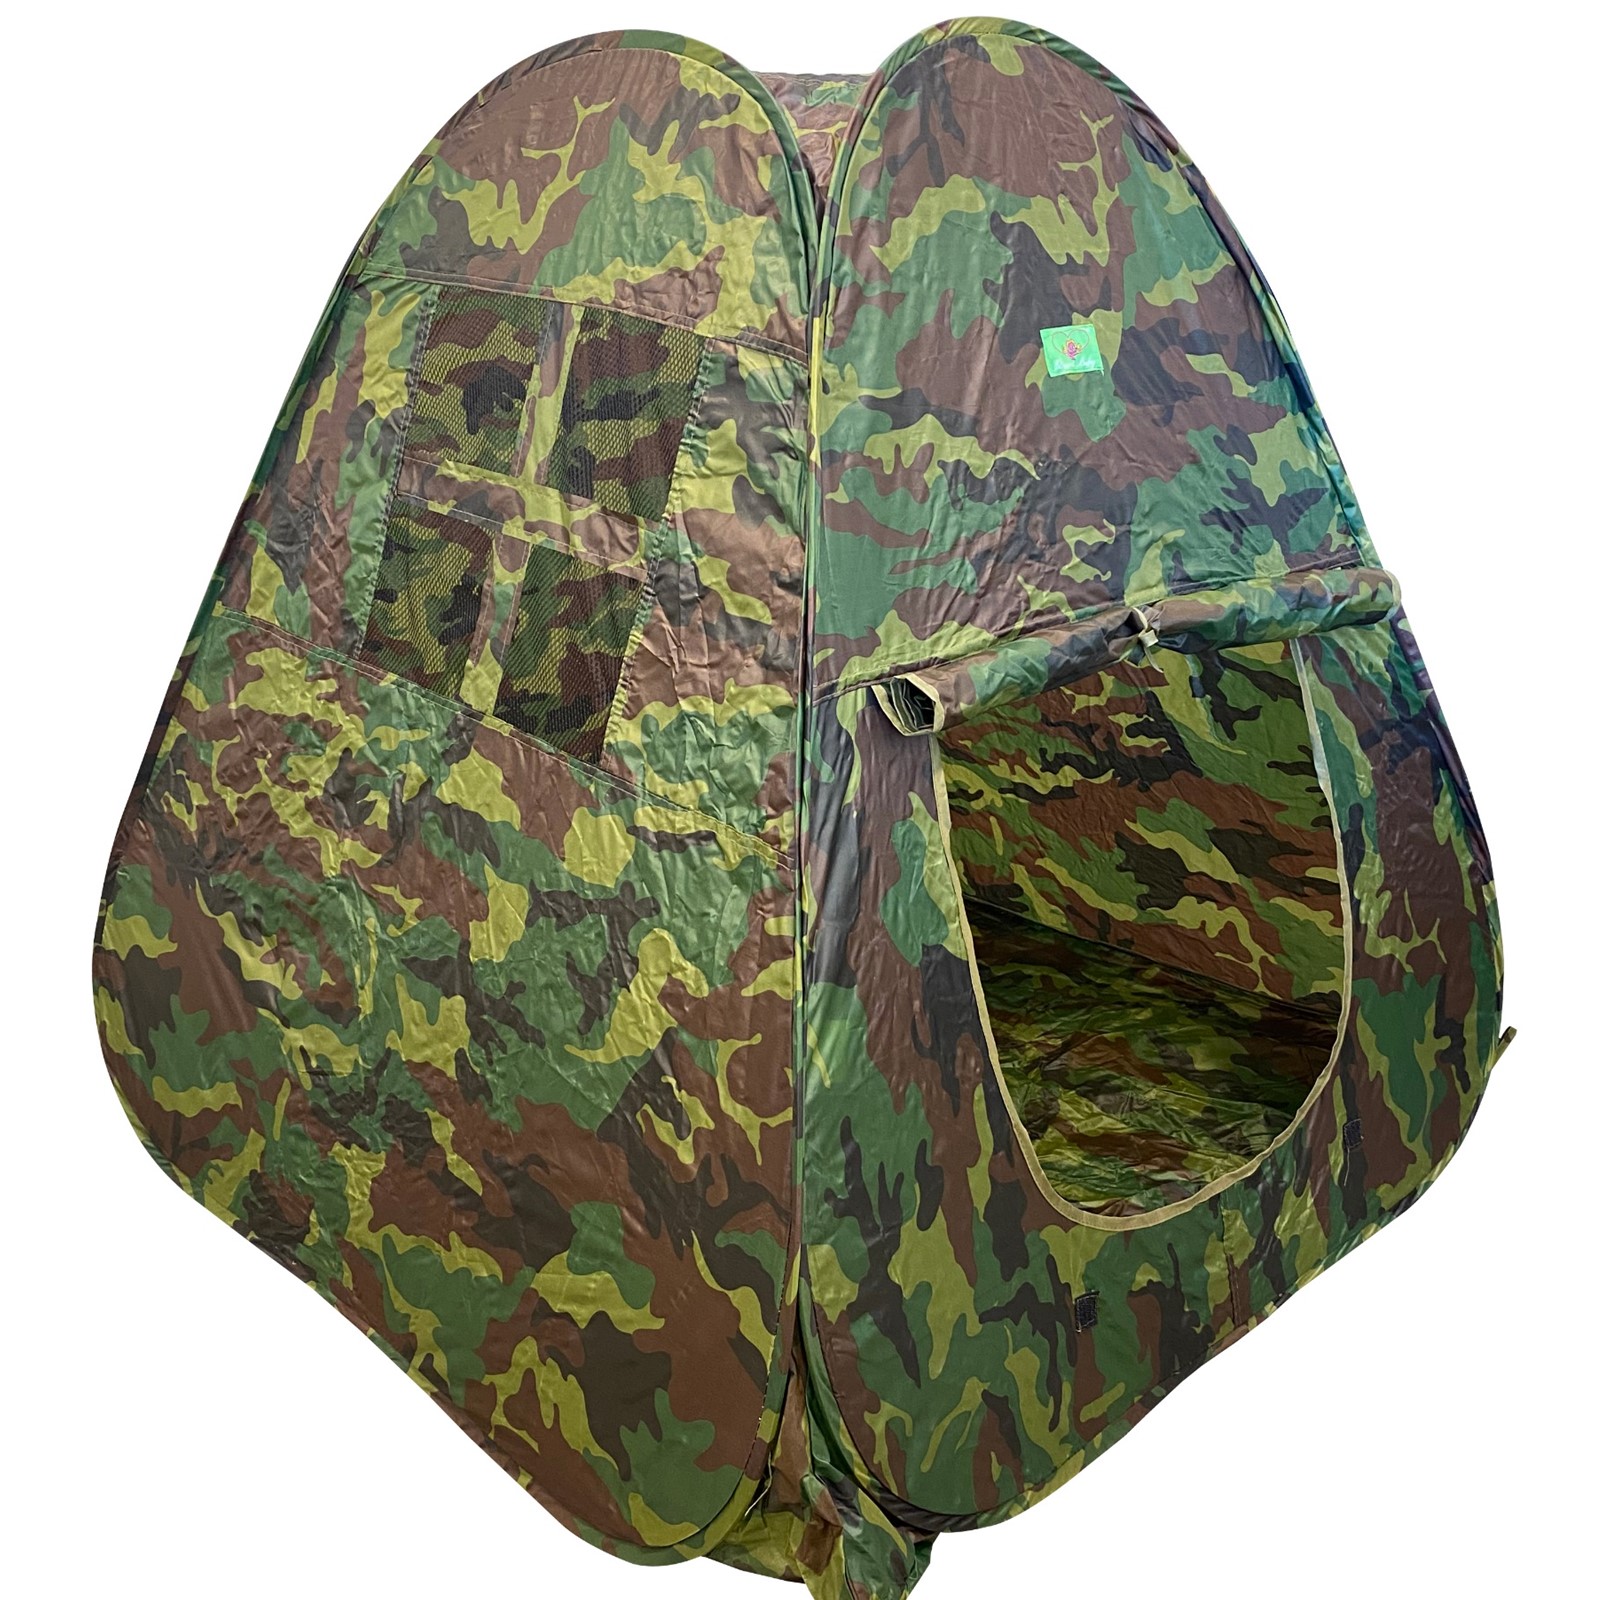 Vokodo Kids Pop Up Camouflage Play Tent Foldable Indoor Outdoor Camping Style Camo Hunting Pretend Play Army Playhouse Boosts Imagination Creative Learning Perfect Toy for Children Boys and Girls